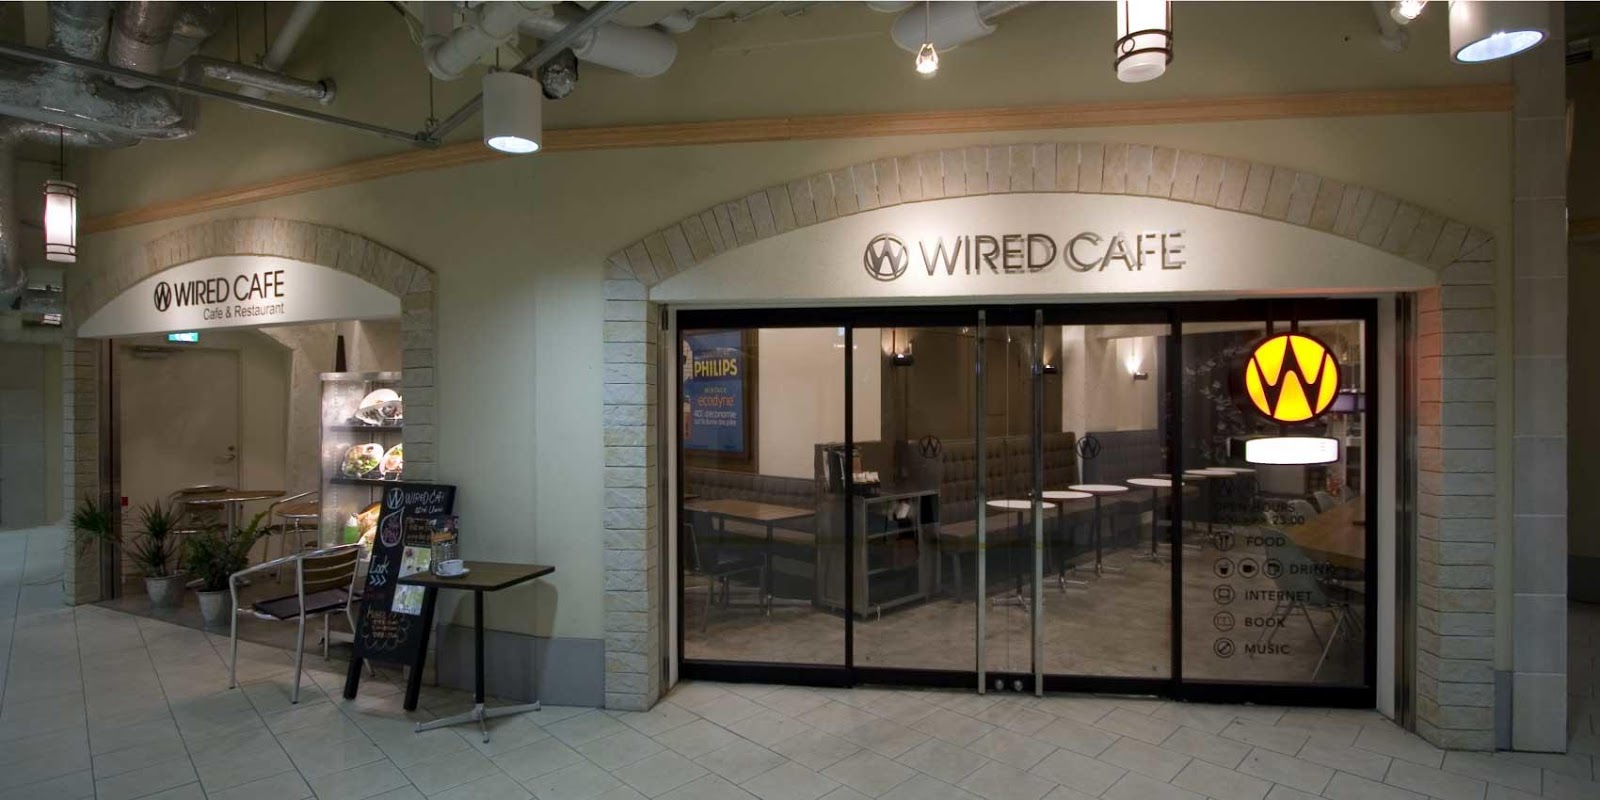 WIRED CAFE アトレ上野店の風景